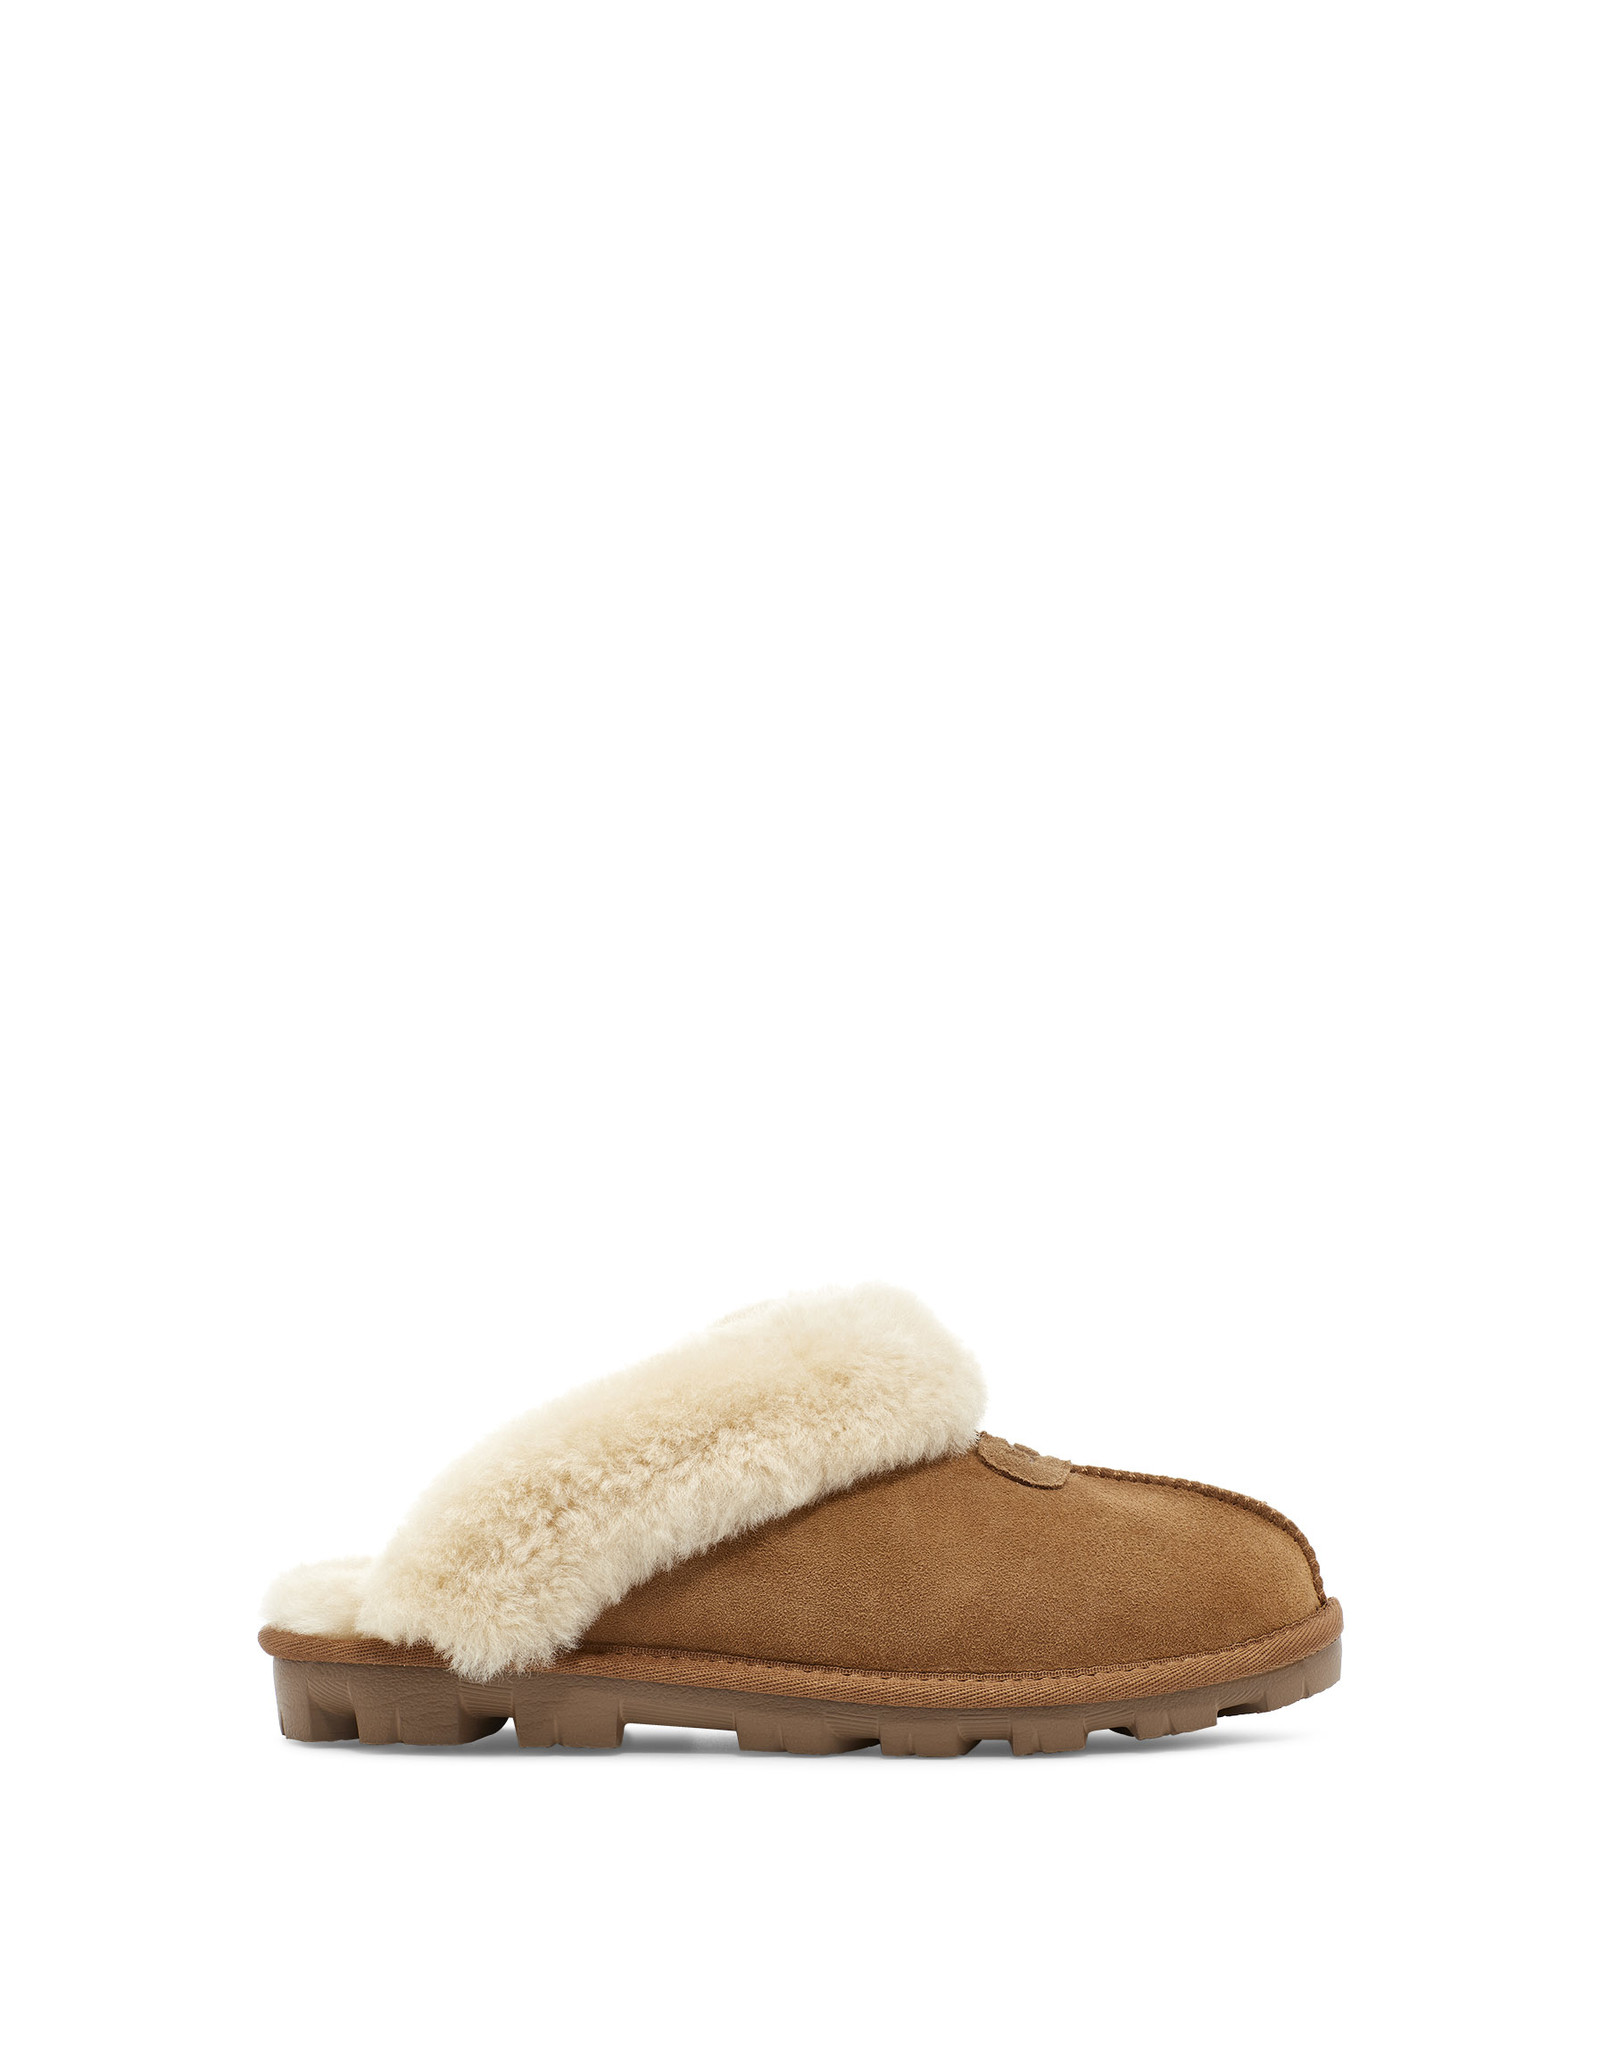 UGG Coquette Cow Print Chestnut Slippers - Women's – MyCozyBoots